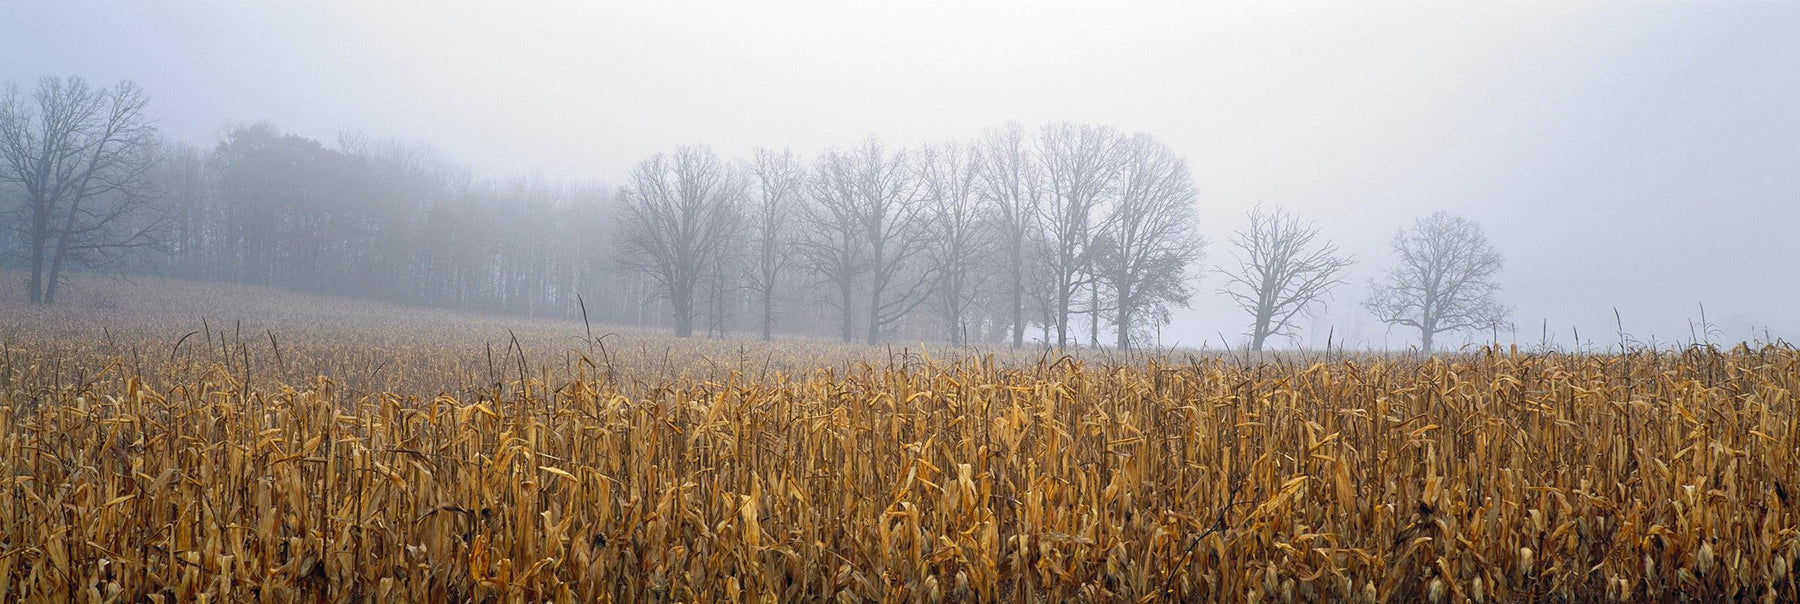  Sunlight filtering through the fog onto a leafless forest and corn field in Minnesota